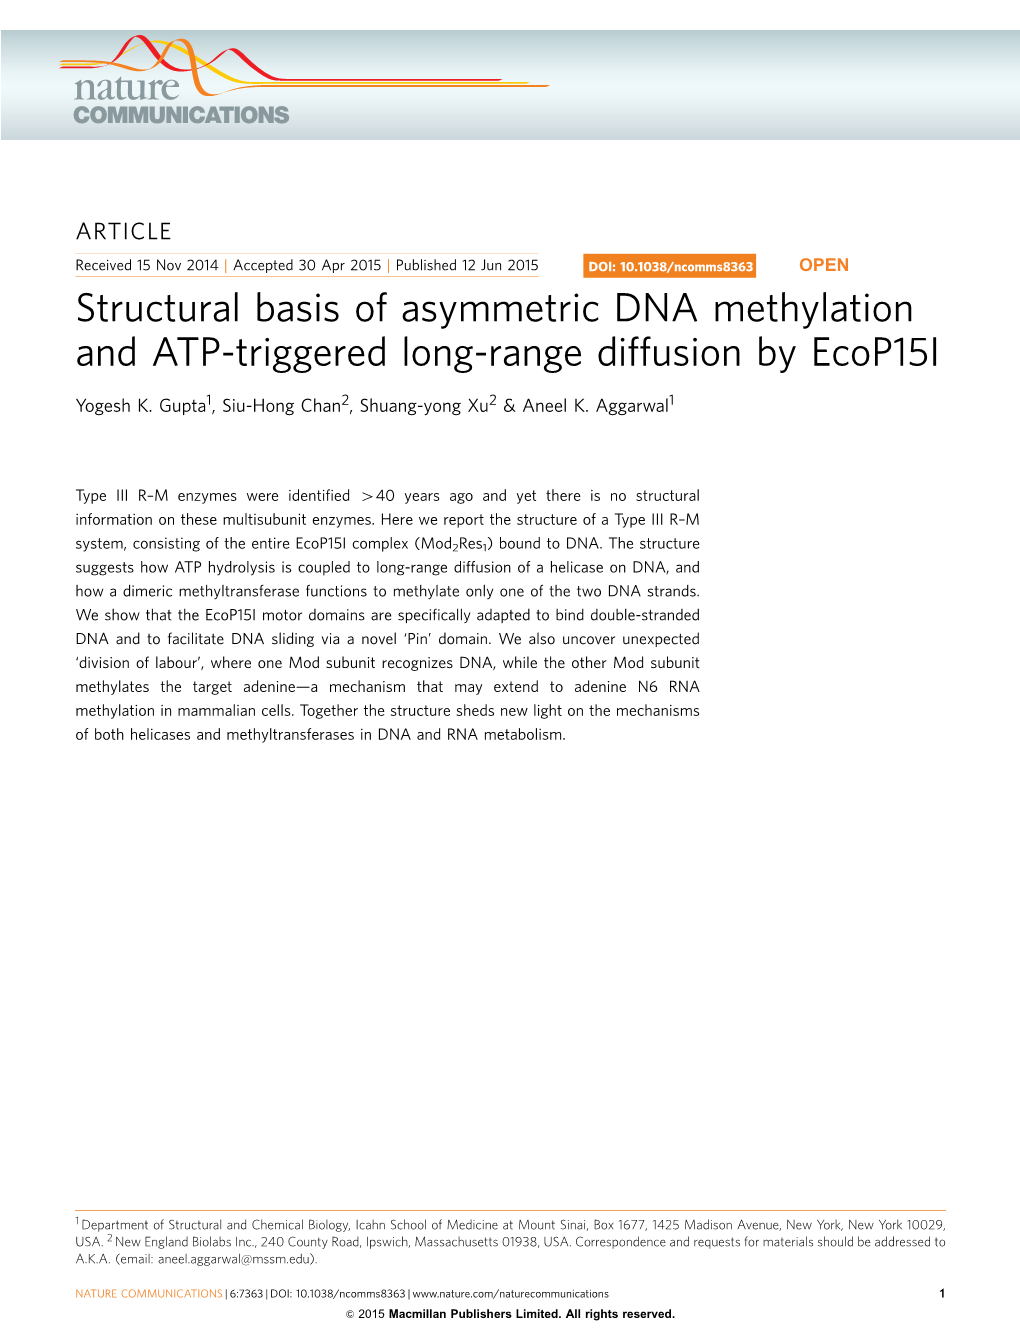 Structural Basis of Asymmetric DNA Methylation and ATP-Triggered Long-Range Diffusion by Ecop15i